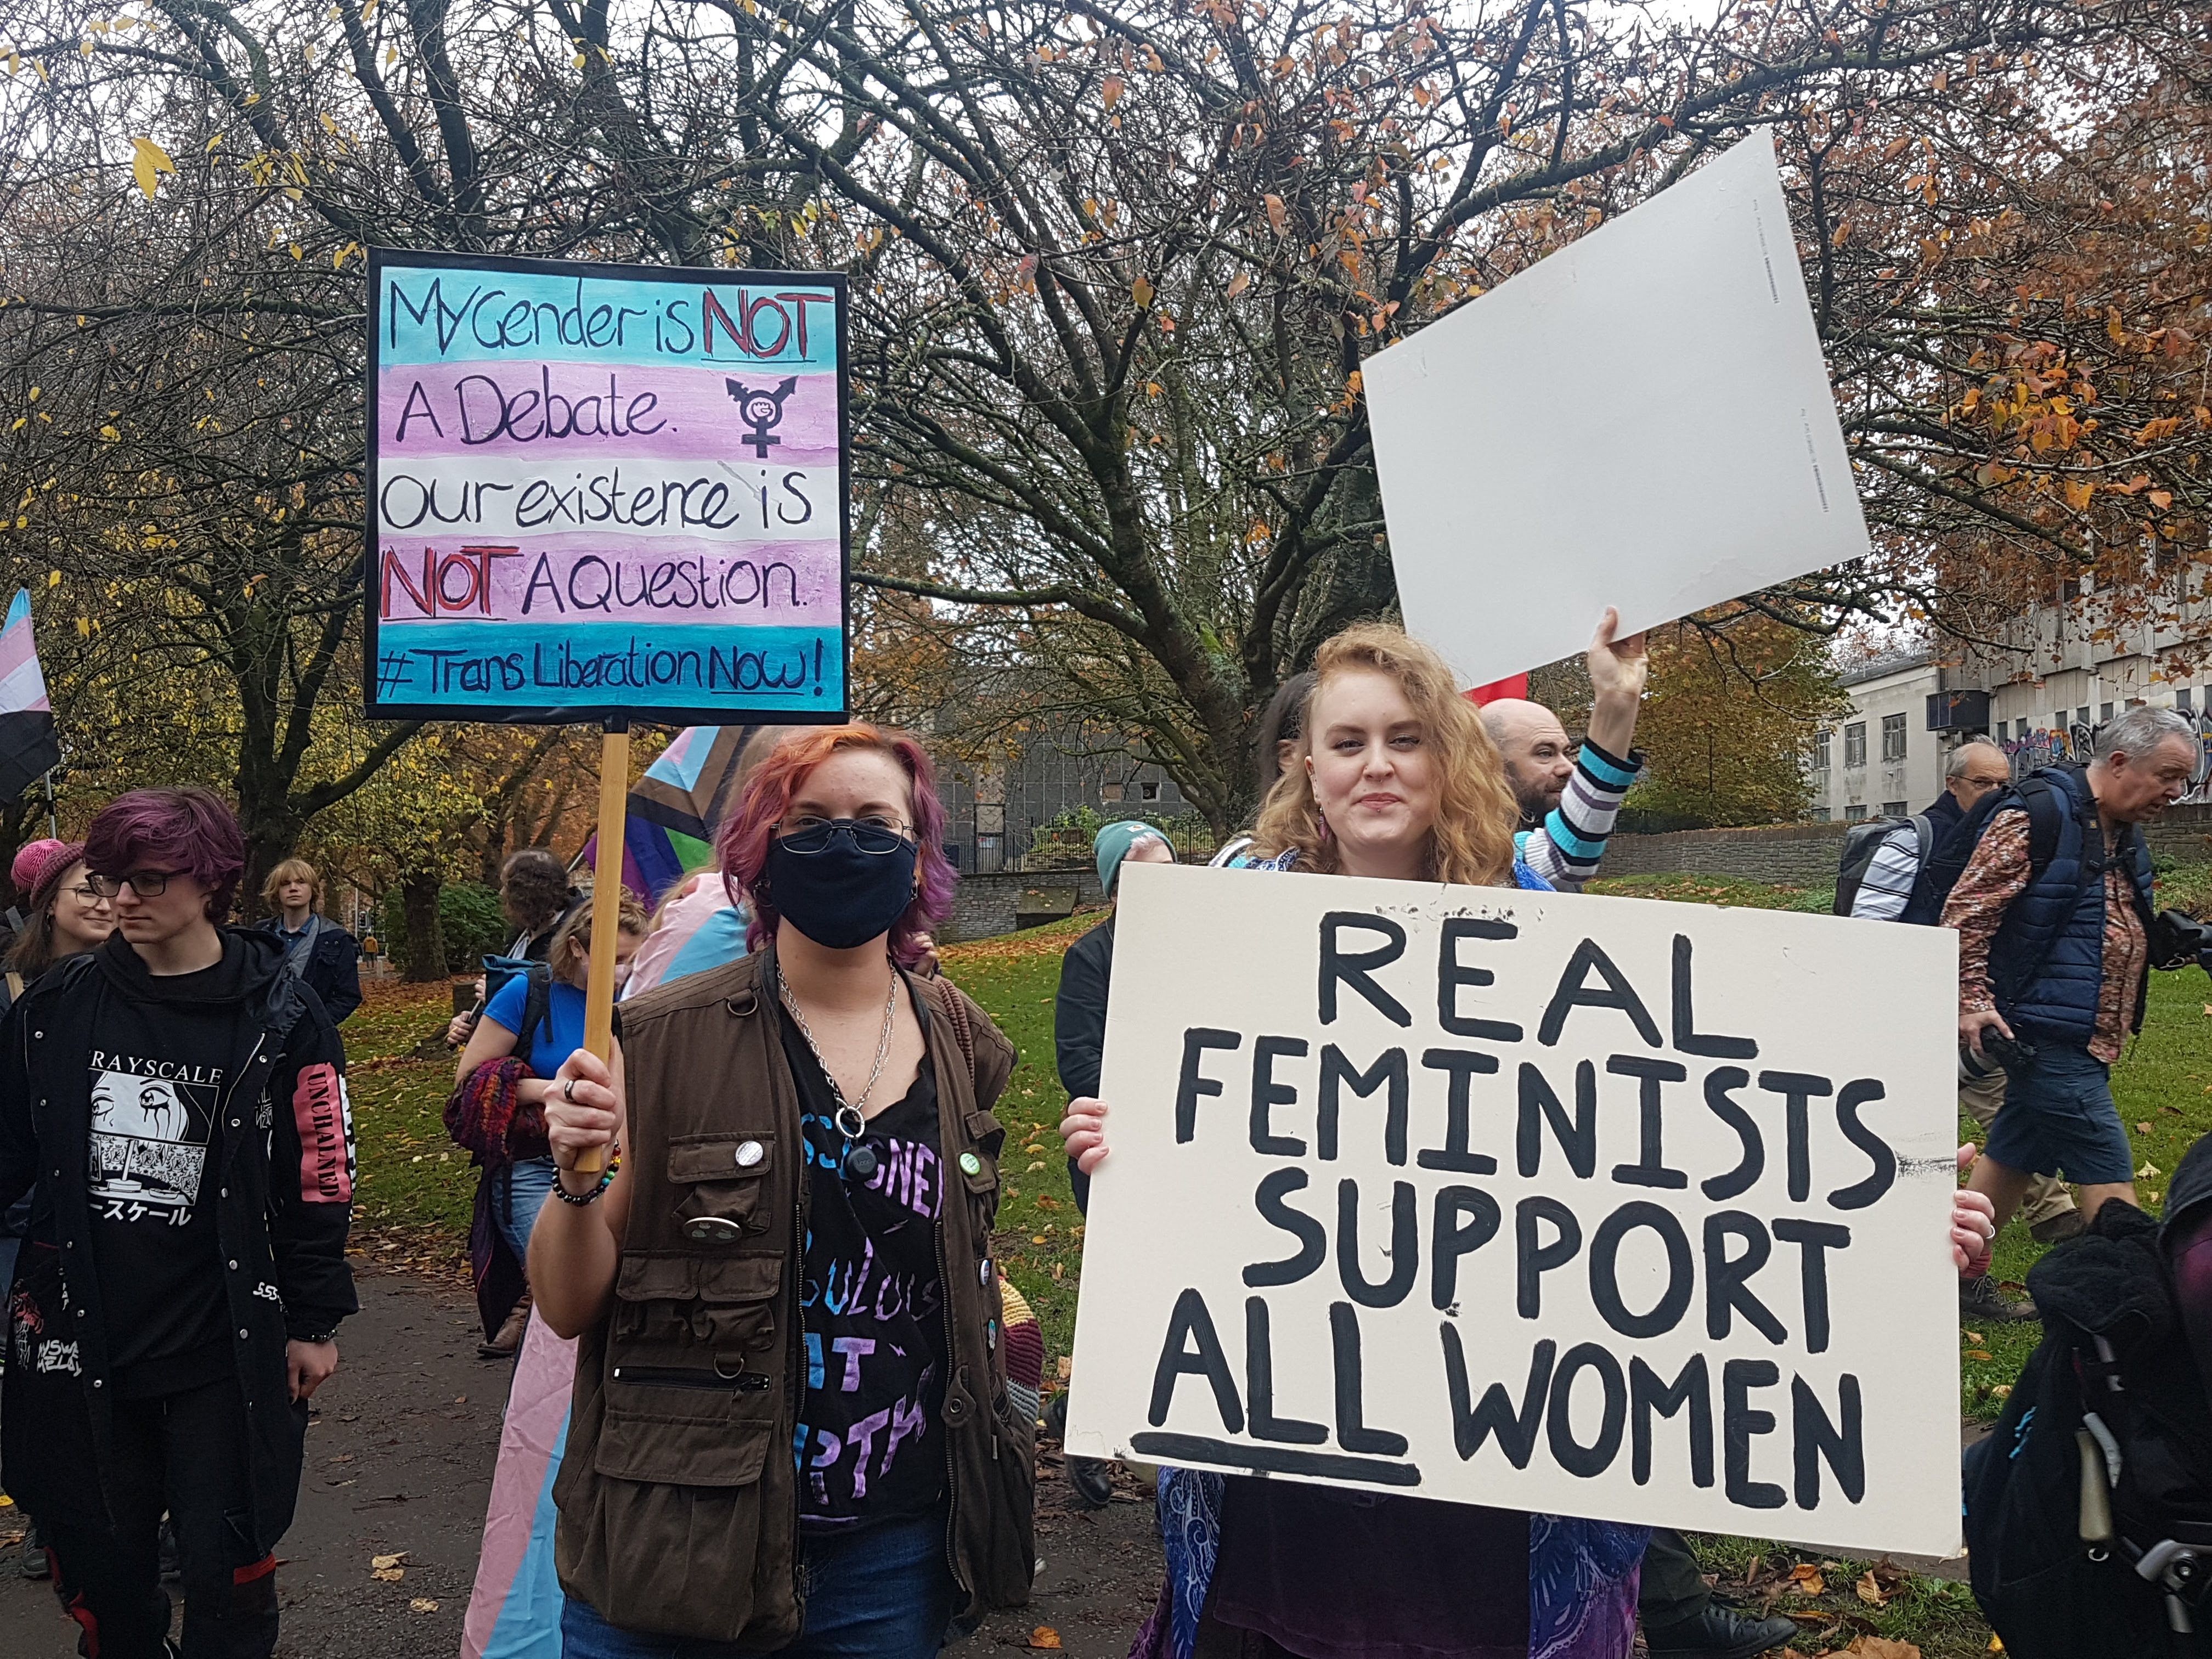 Two protesters hold placards saying "Real feminists support all women." and "My gender is not a debate."